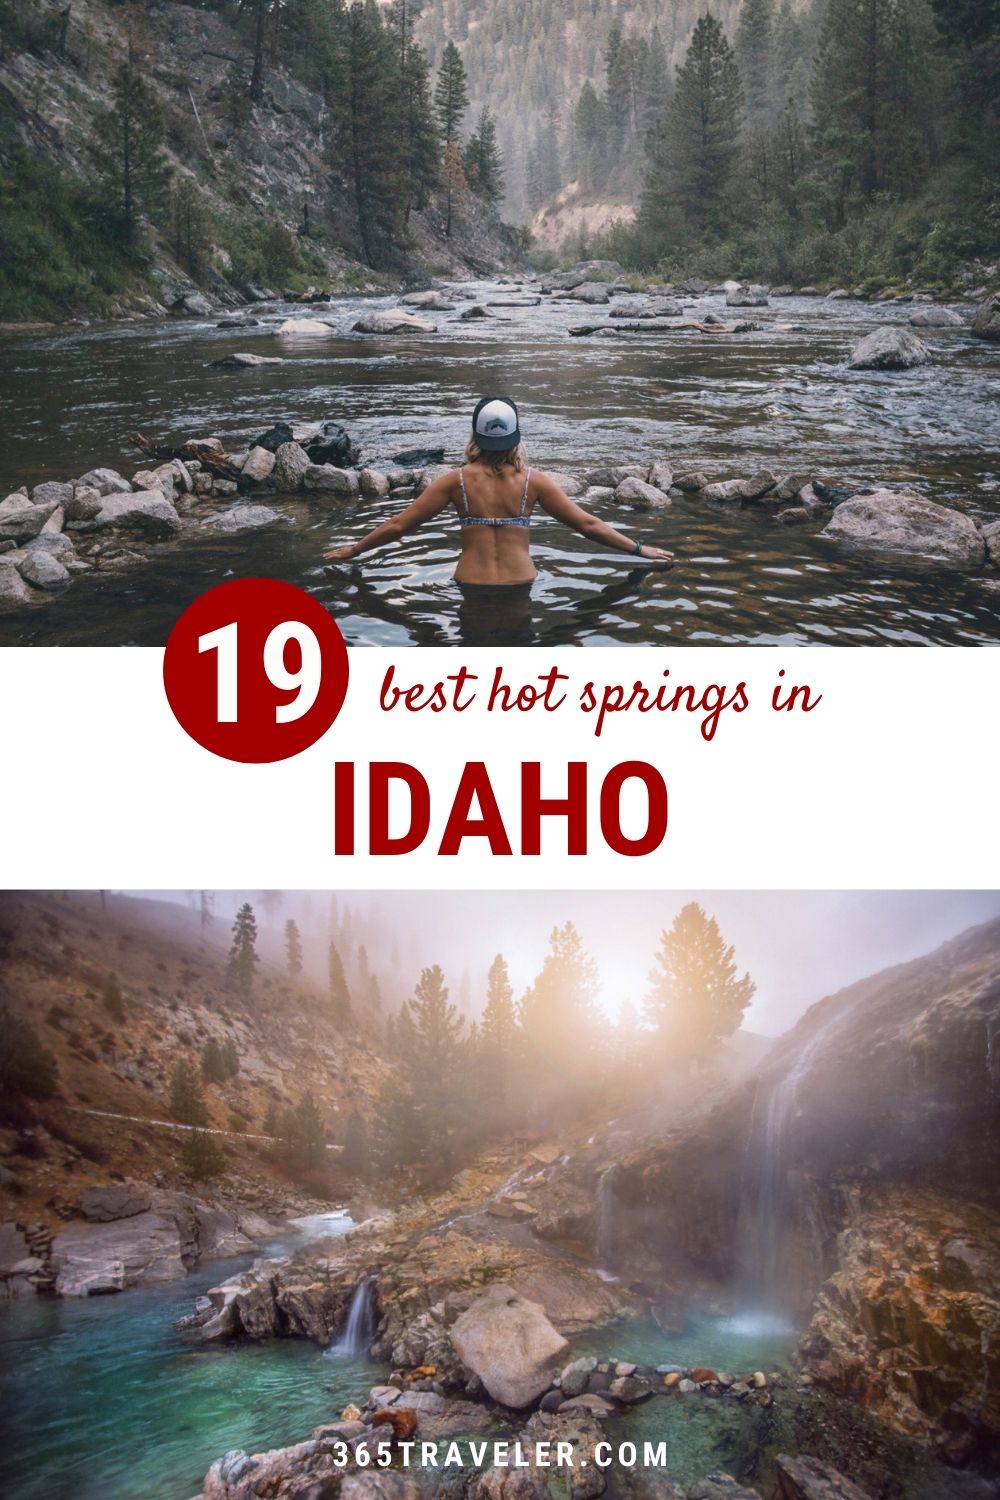 HOT SPRINGS IDAHO: 19 SPRINGS YOU'VE GOT TO VISIT (Mapped!)